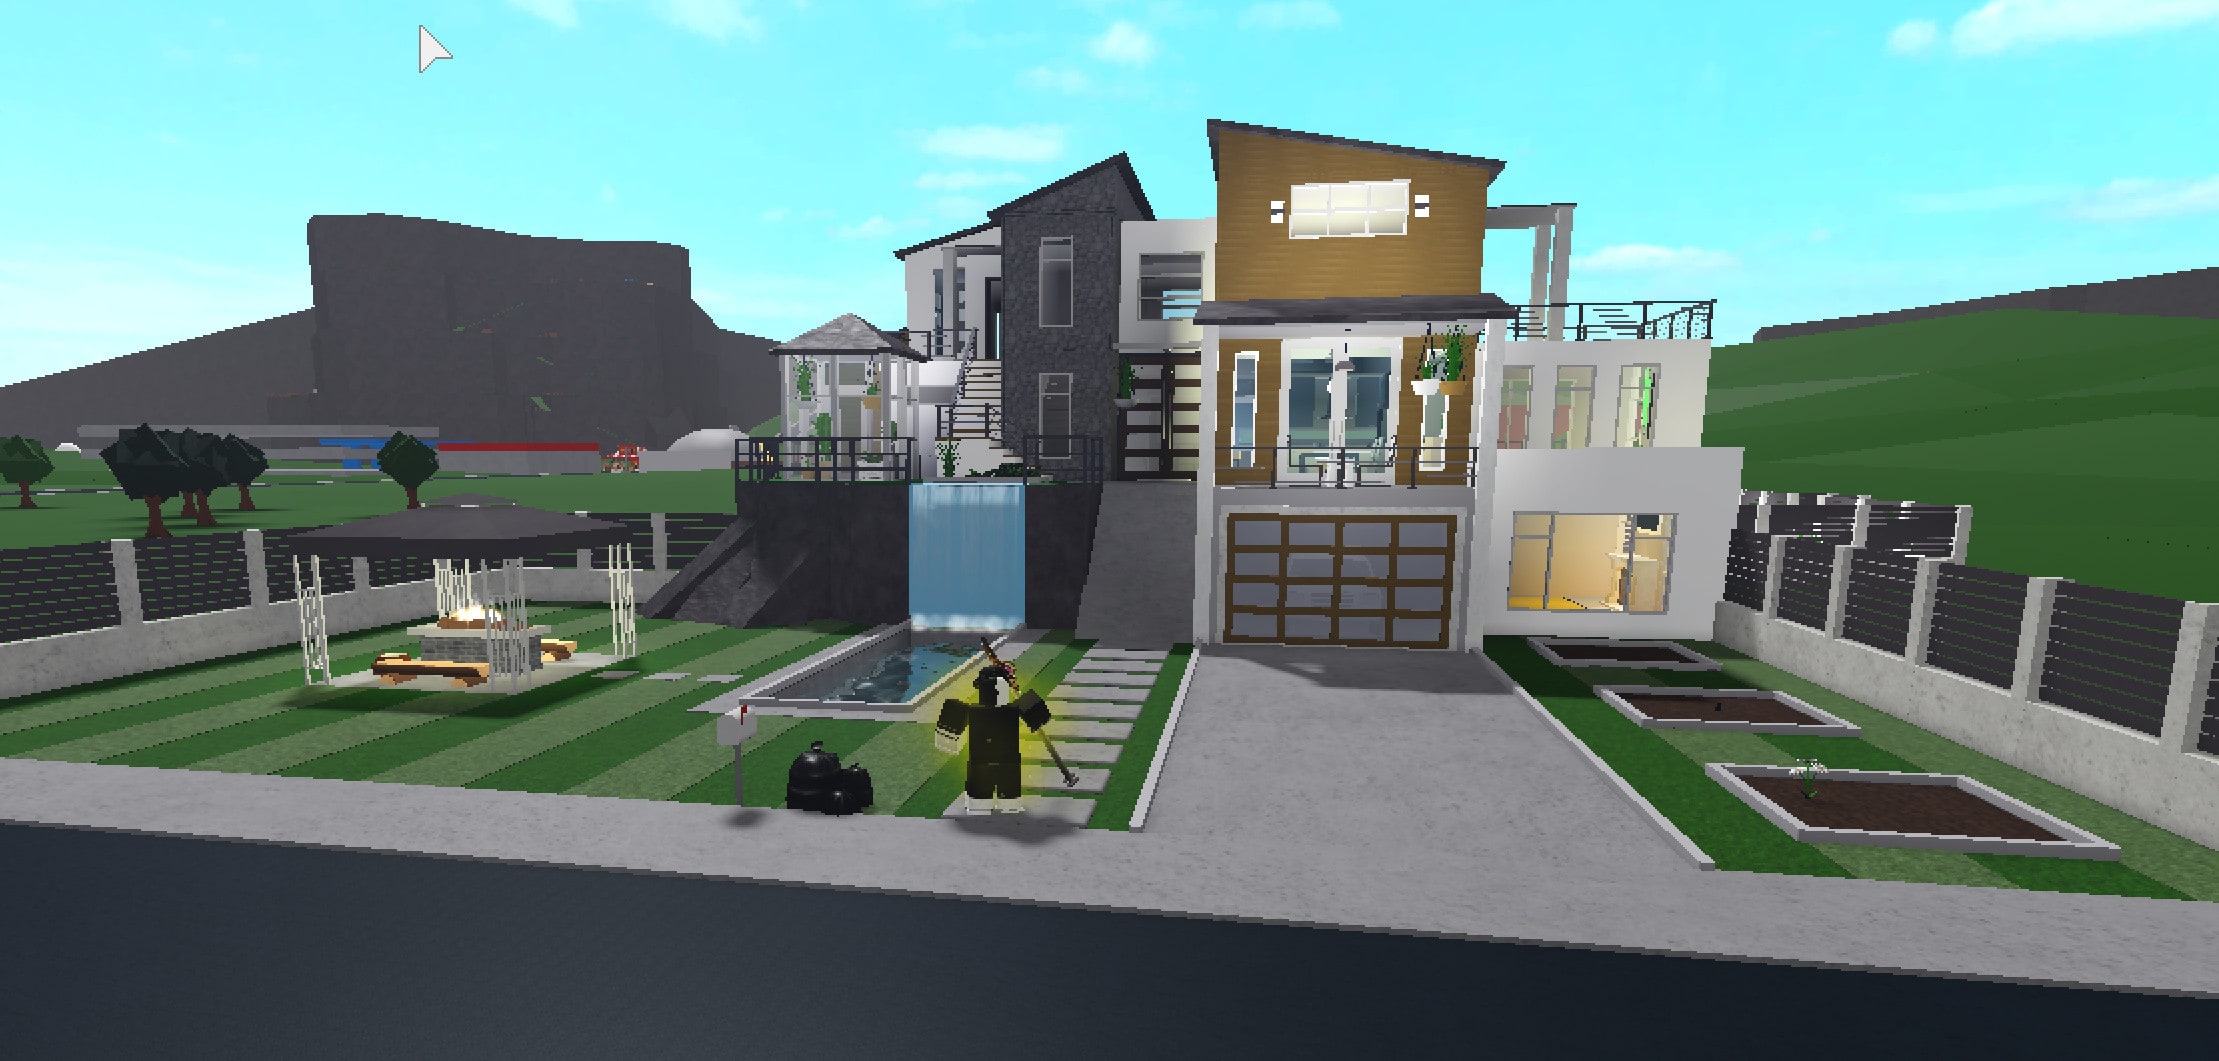 Roblox Welcome To Bloxburg: How To Build A Second Floor